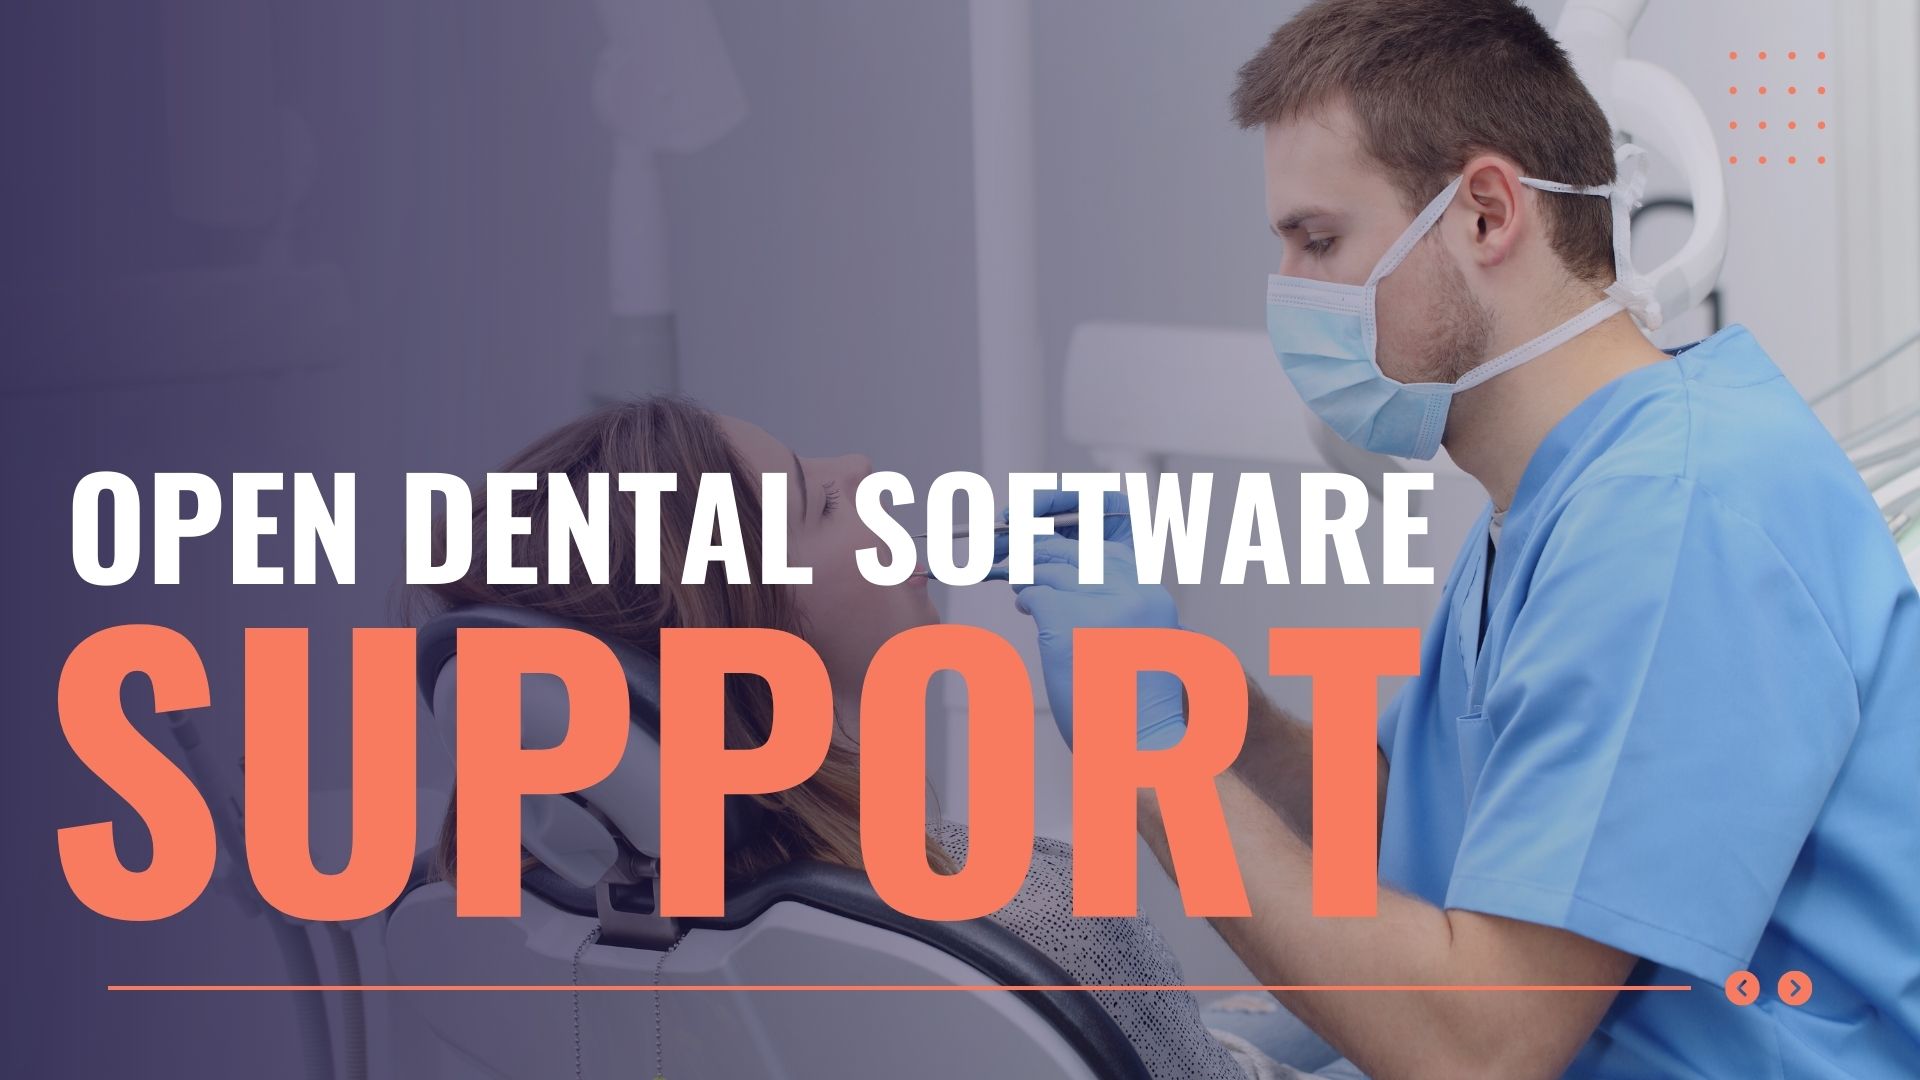 Dental IT Services Company and Open Dental Software